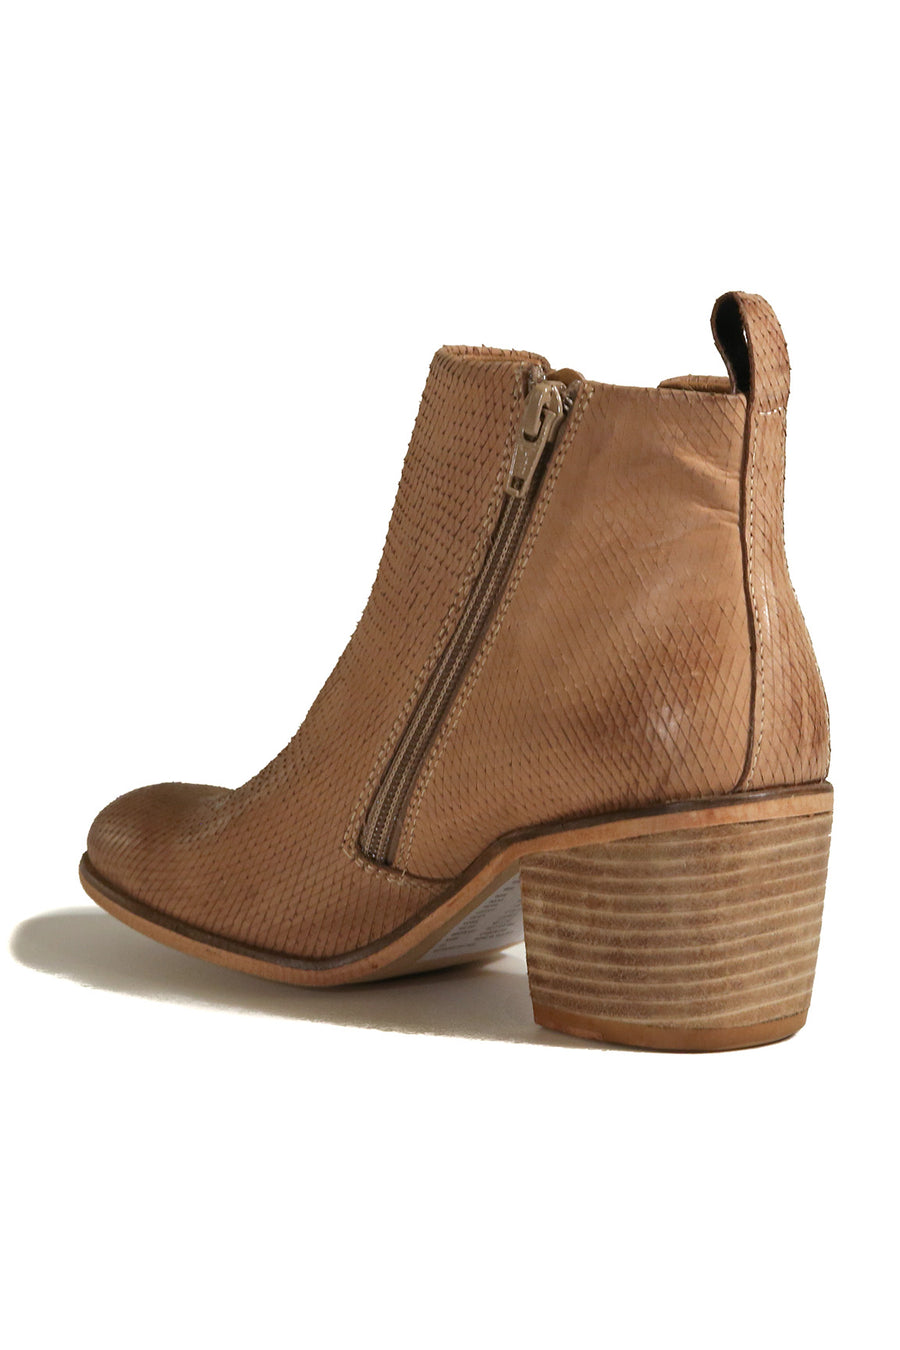 Oslo Tan Snake Effect Leather Boot Front